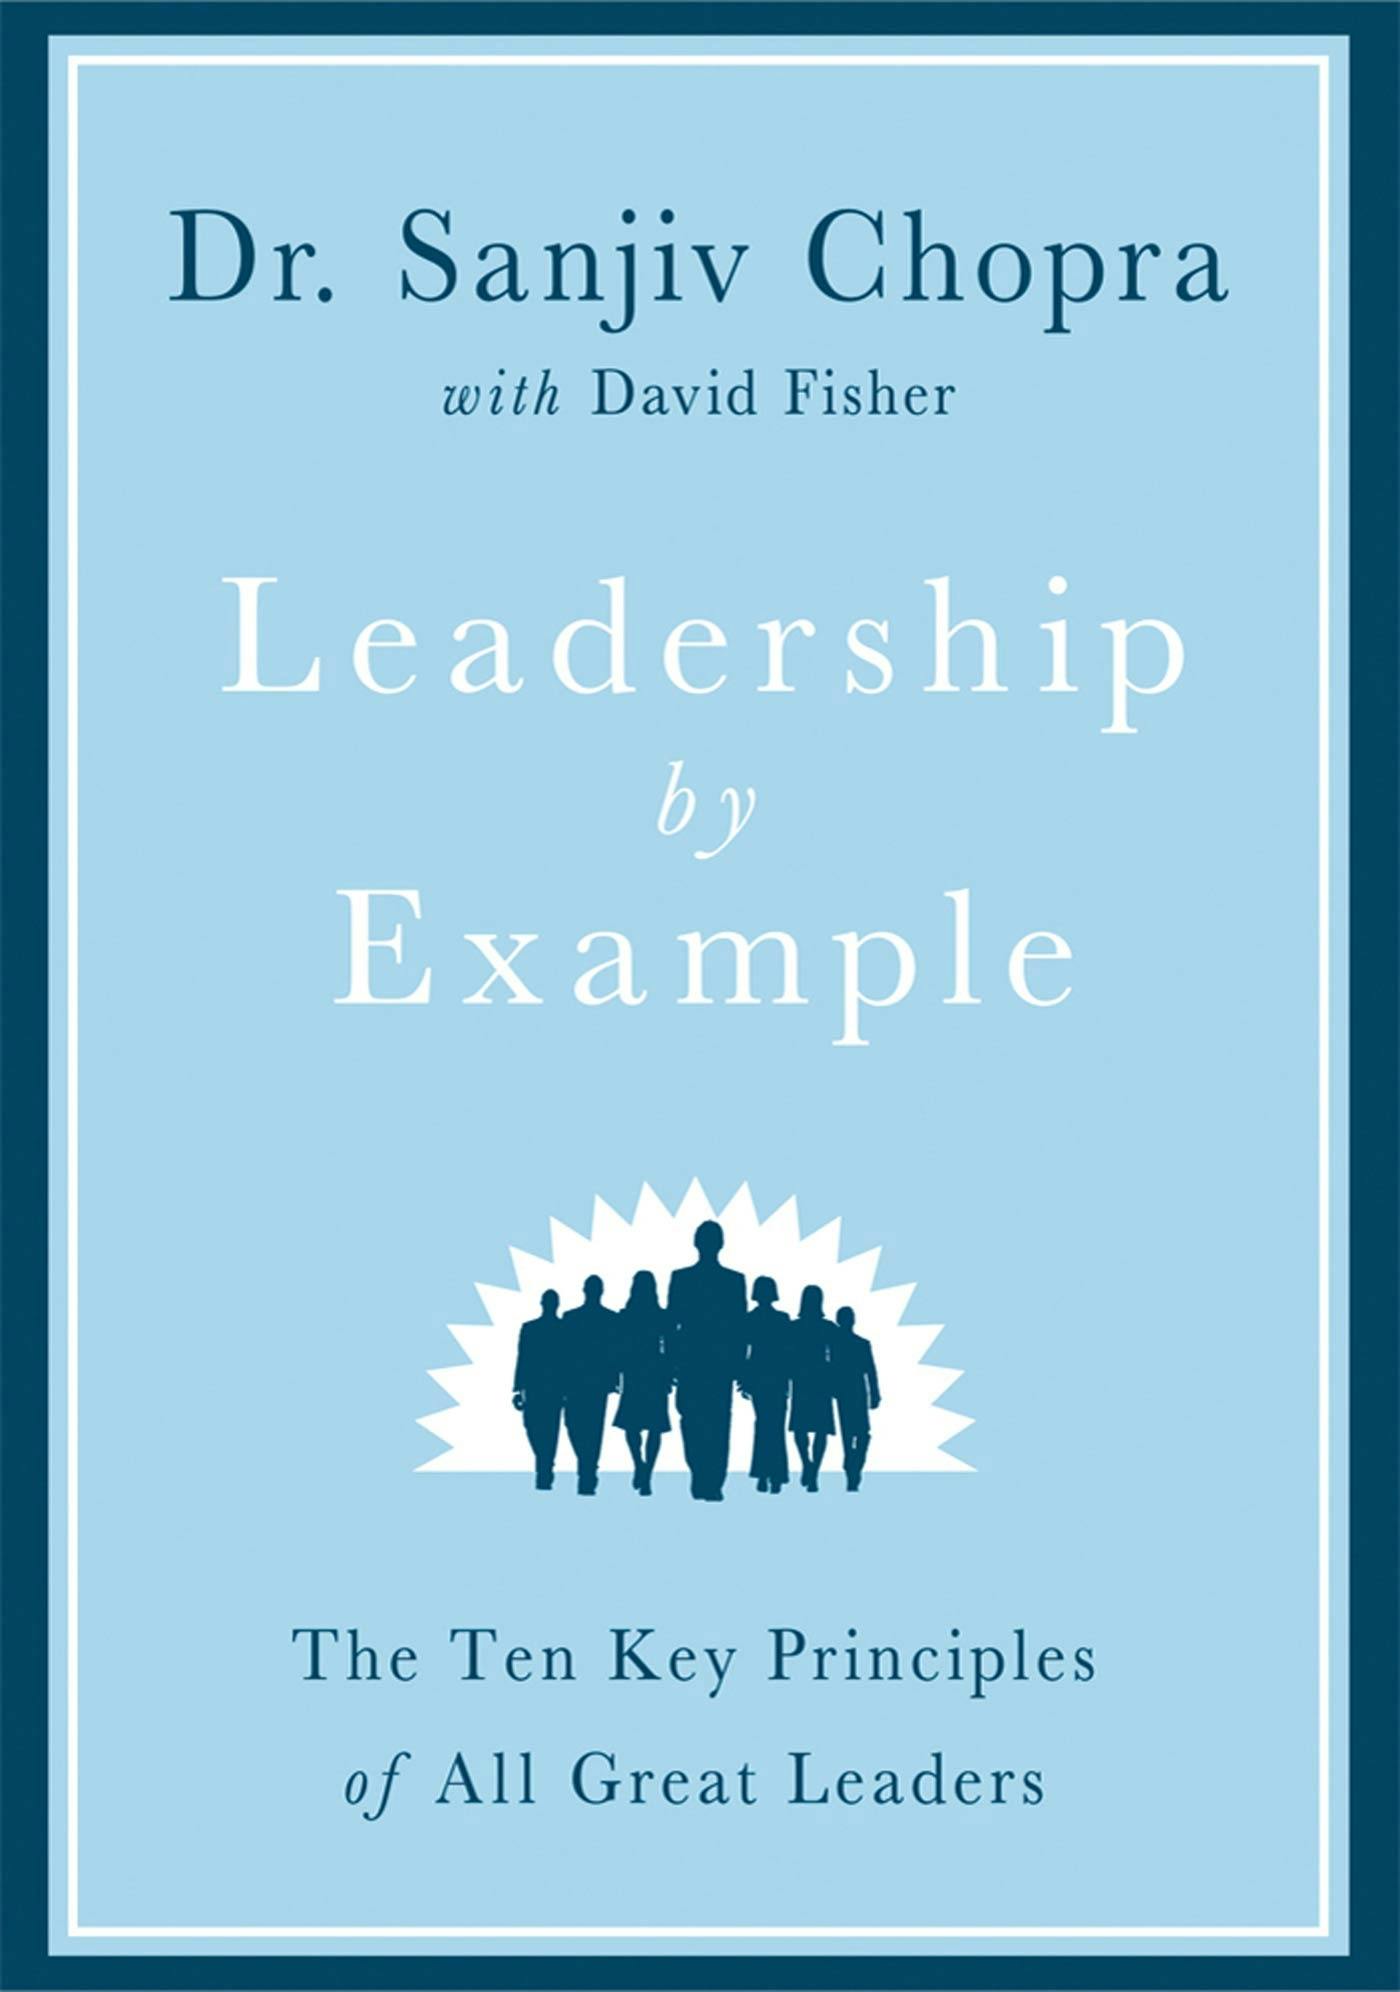 Describes for Leadership by Example by authors